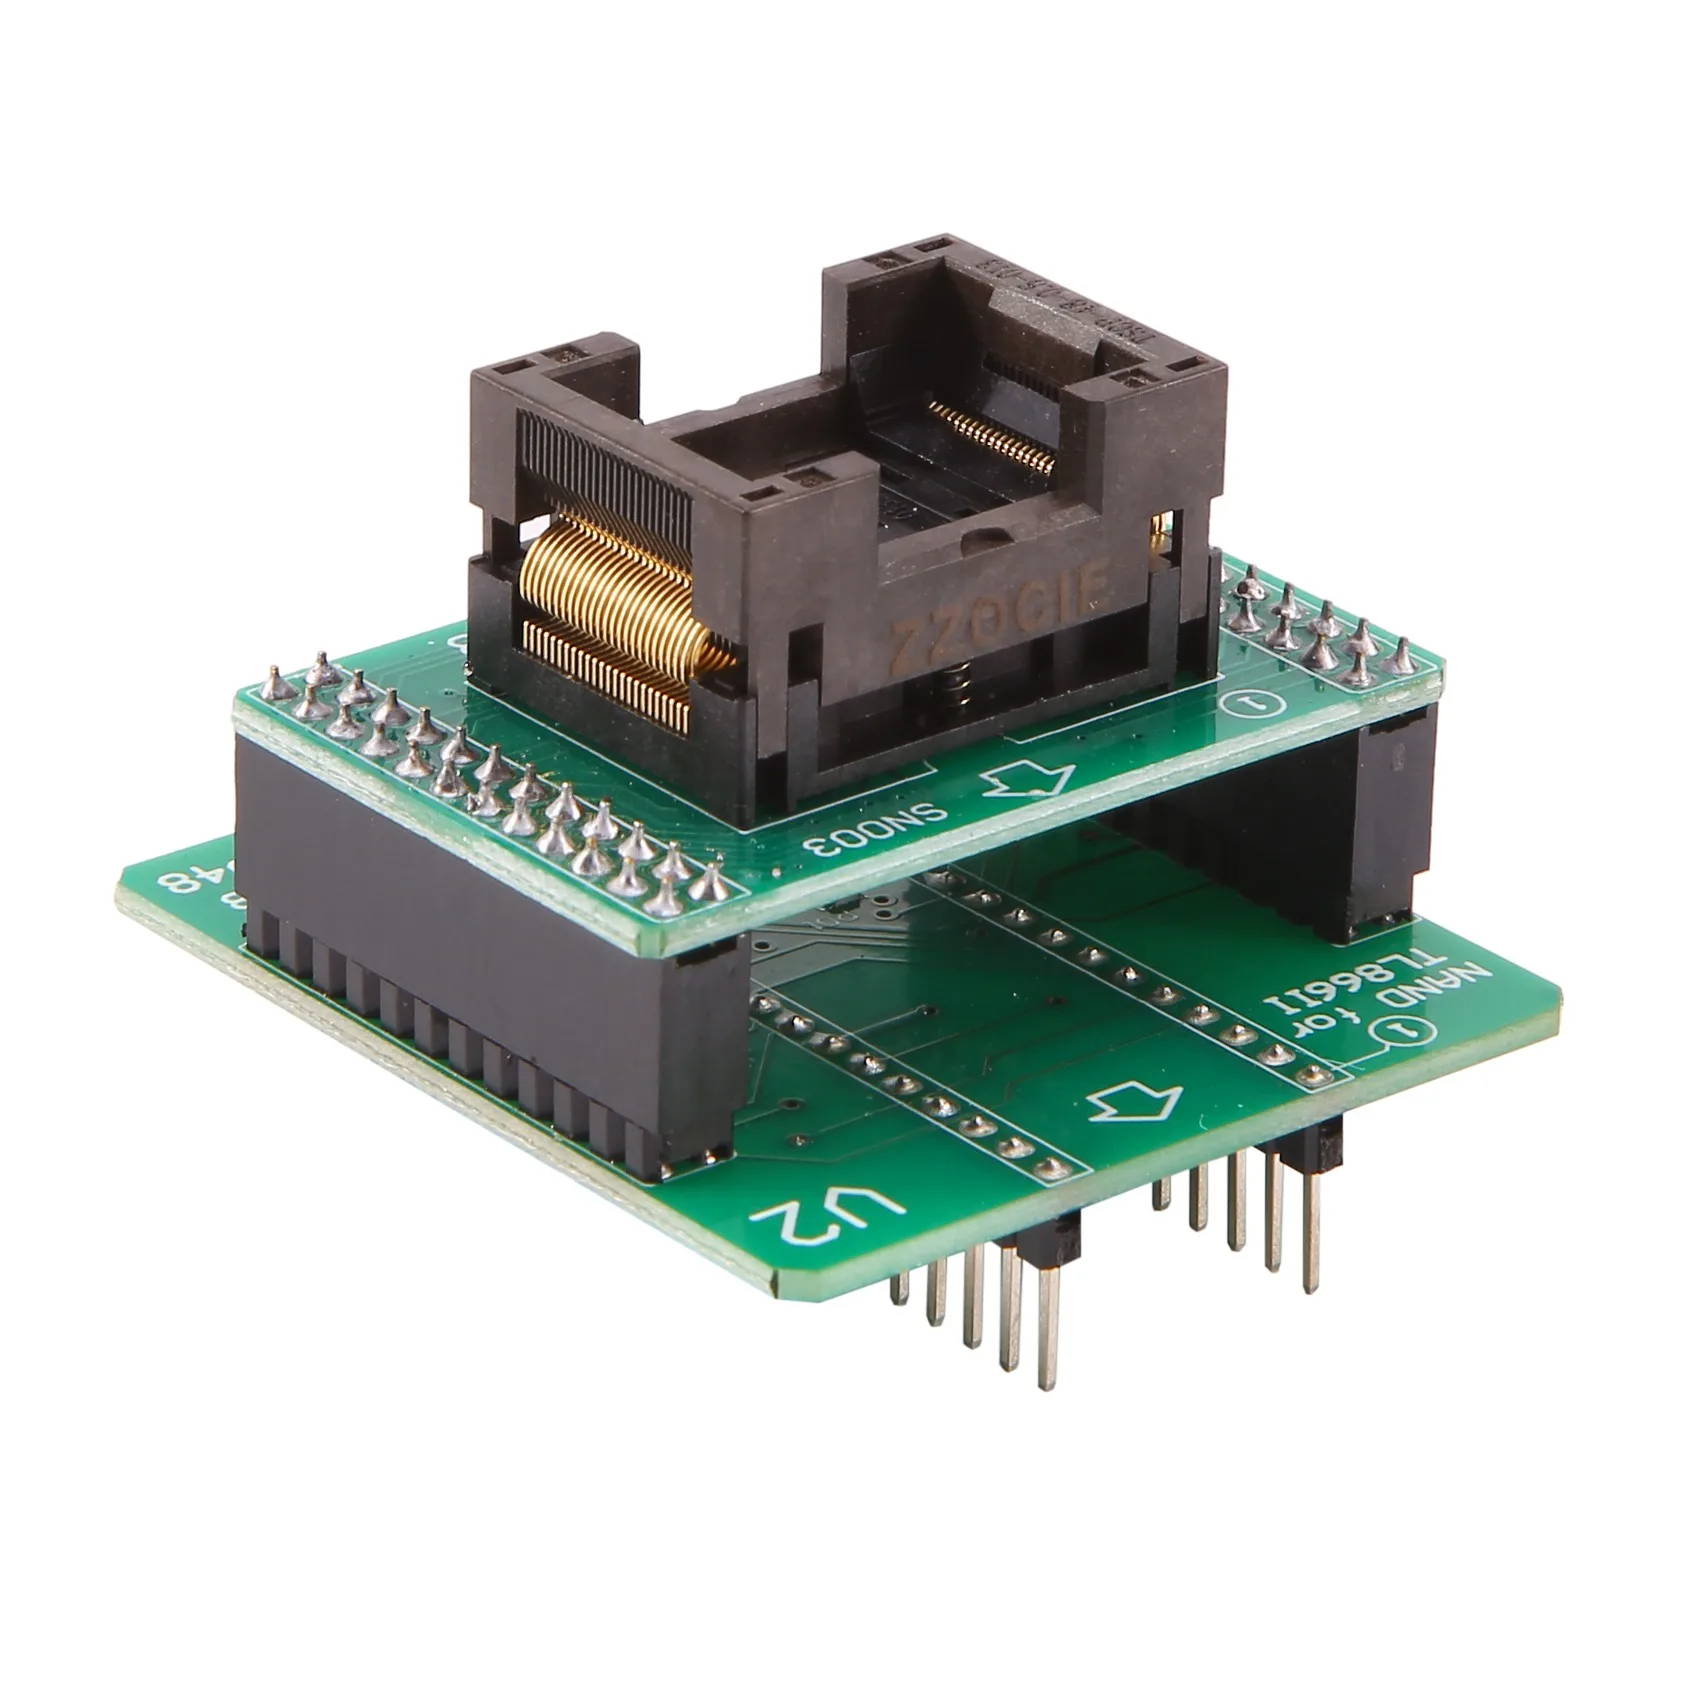 

TSOP48 NAND NAND08 Adapter/Adaptor IC Socket Only for TL866II Plus Programmer for NAND Flash Chips Newest FIXED V2